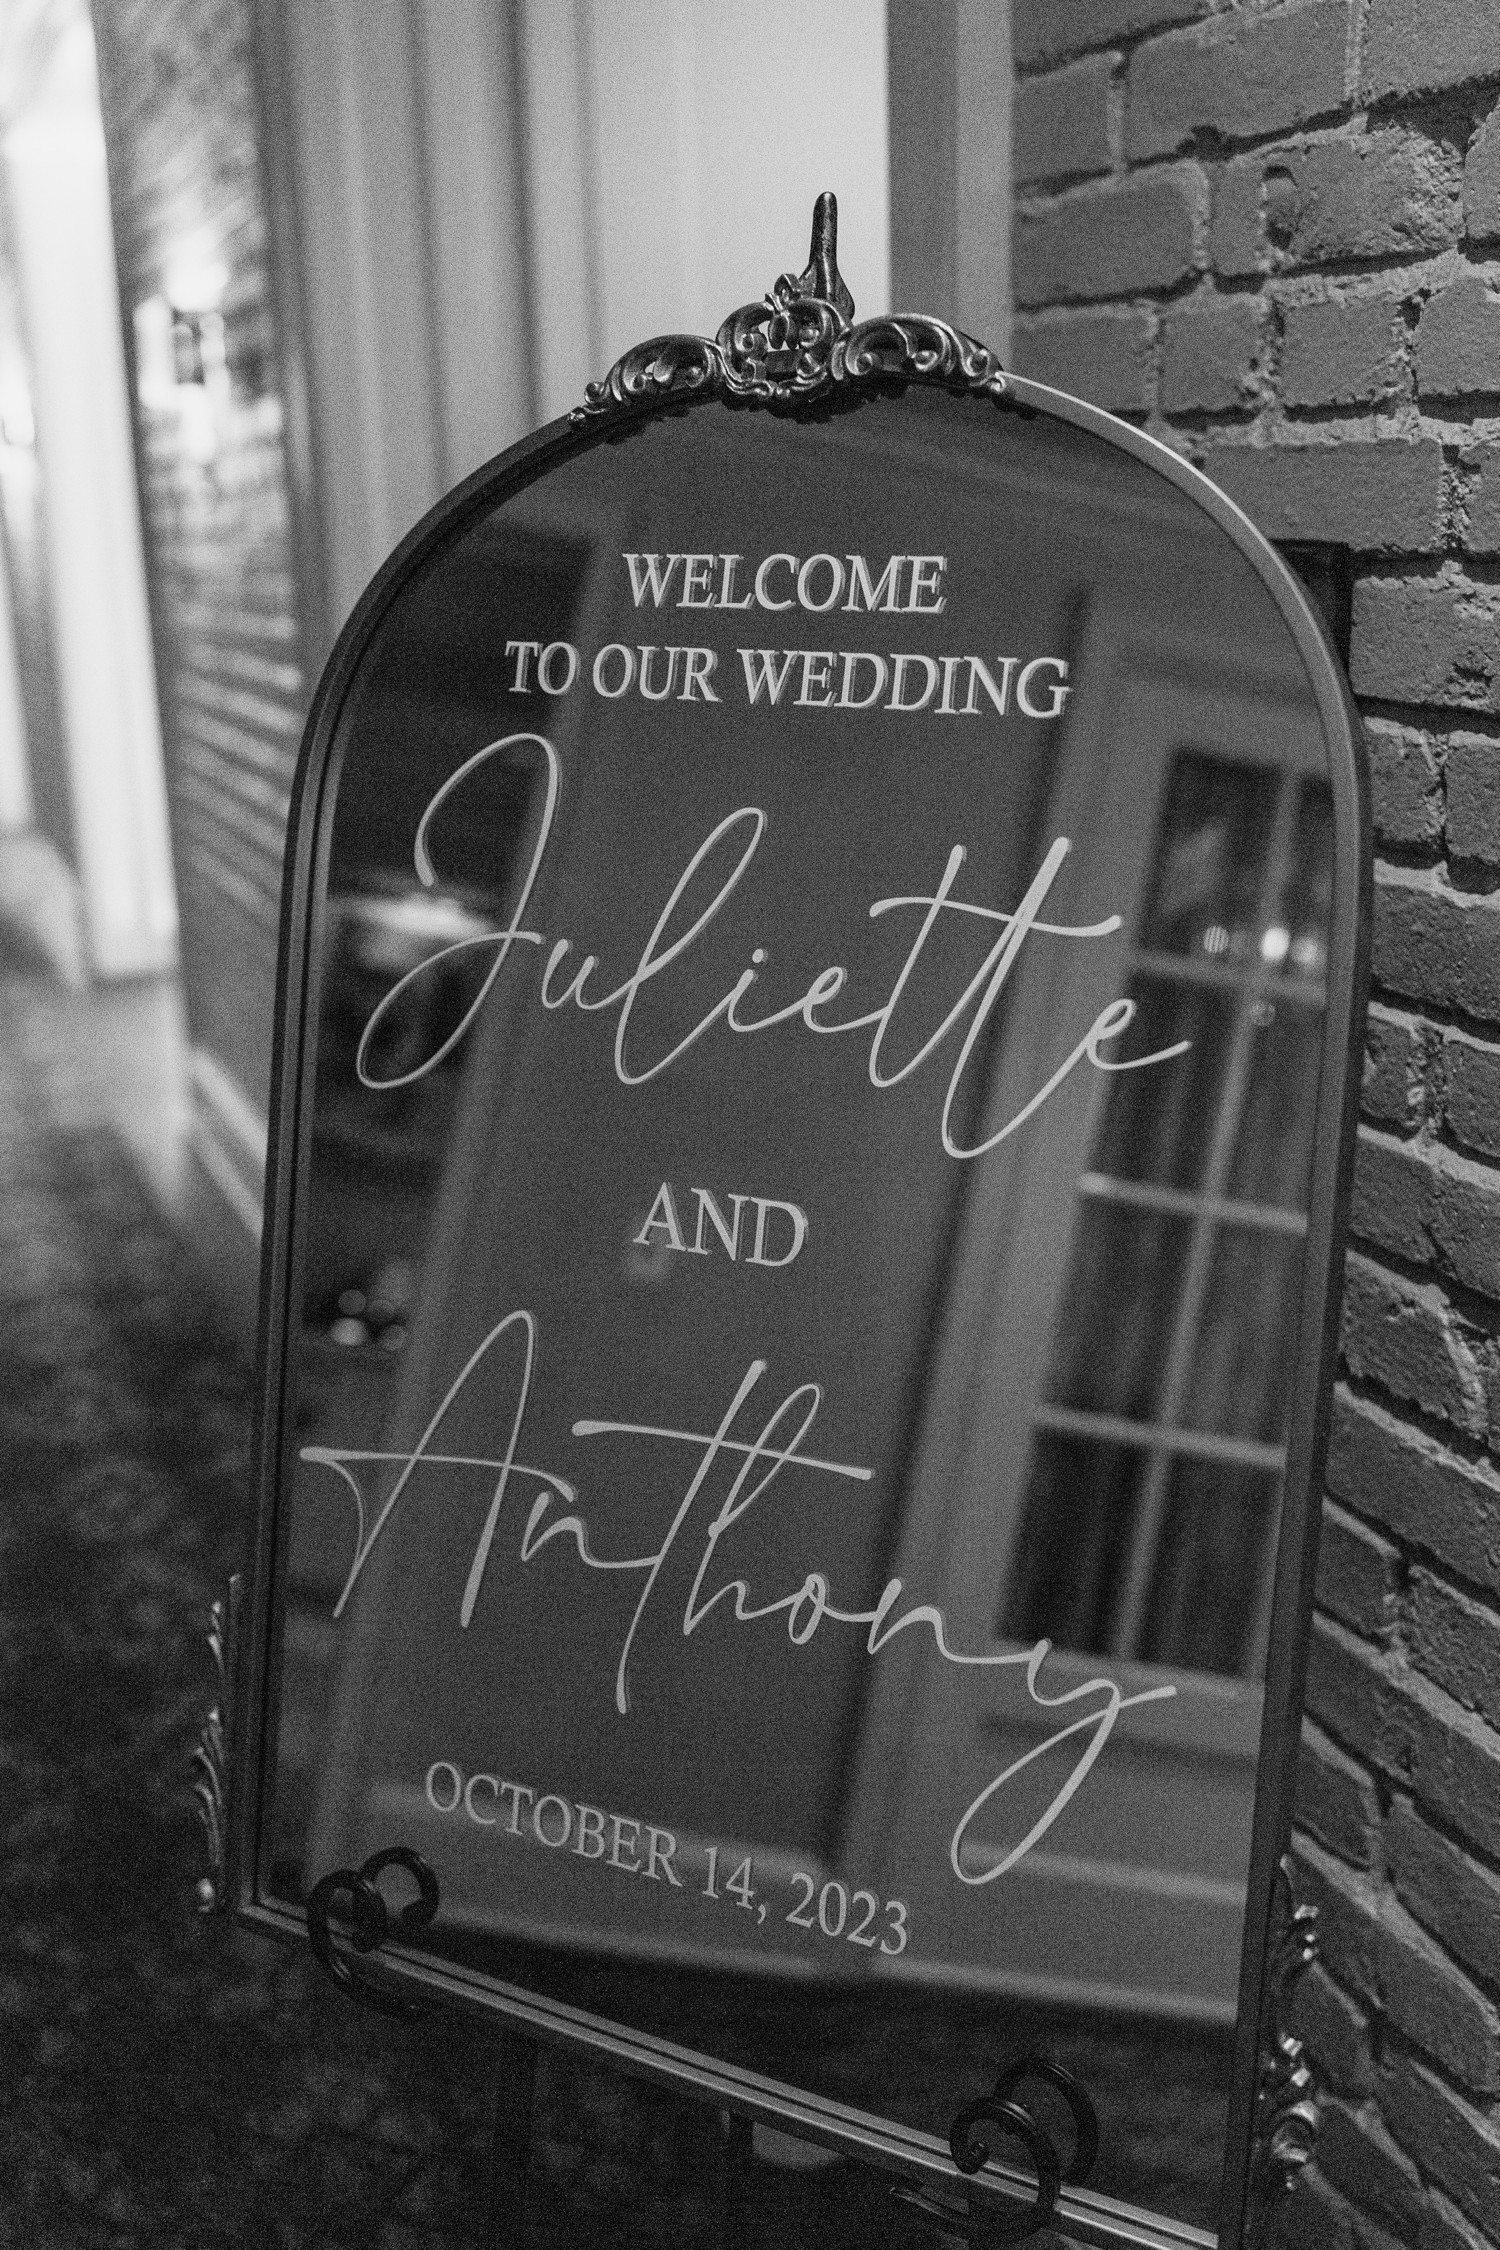 Welcome sign on a mirror for wedding.